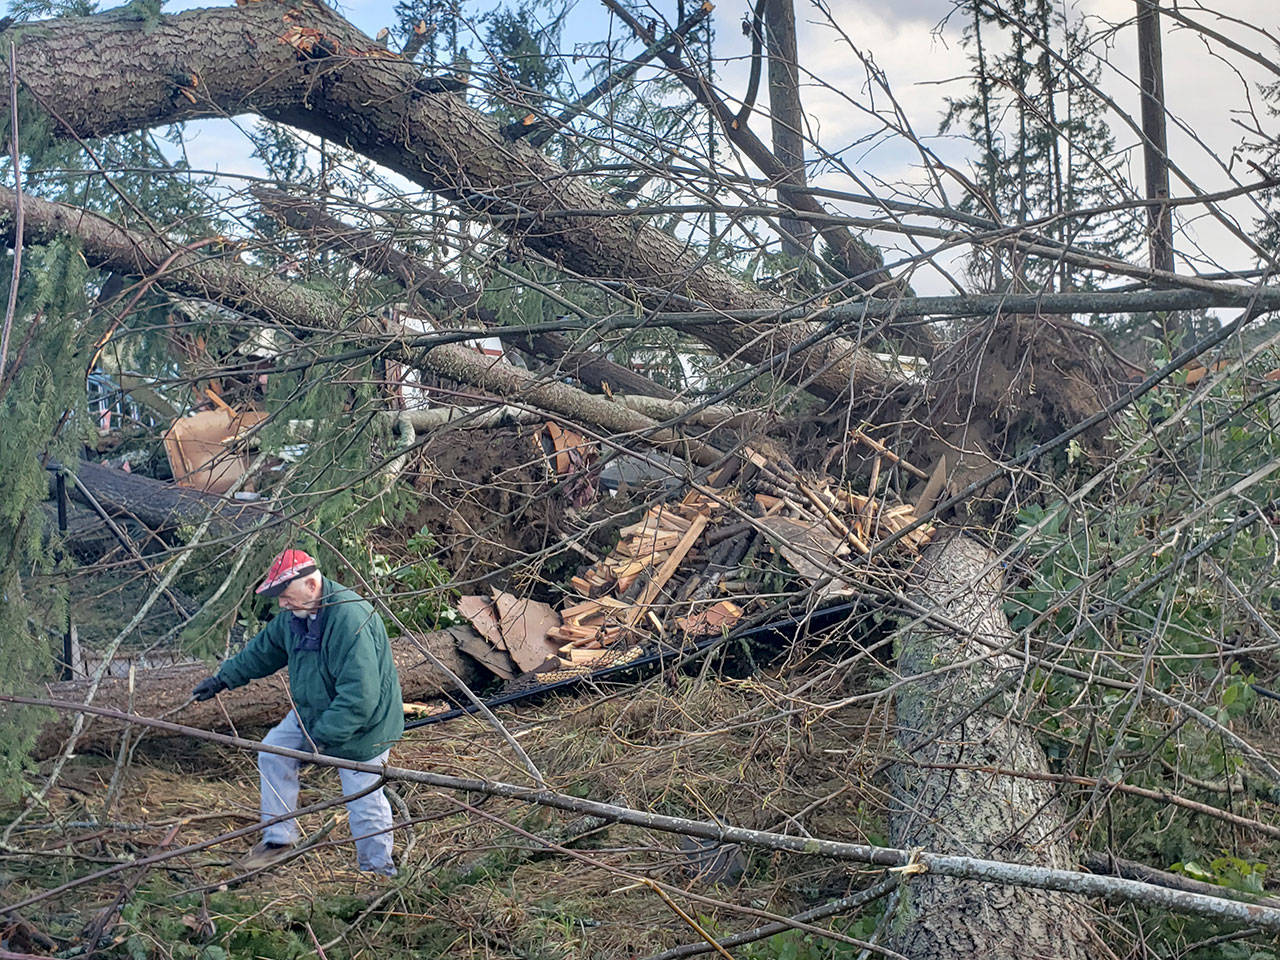 Skip Olmsted, who lives on Southeast Serenade Way, navigates his way around downed branches on his property after a tornado struck a portion of Port Orchard. (Robert Zollna | Kitsap Daily News)